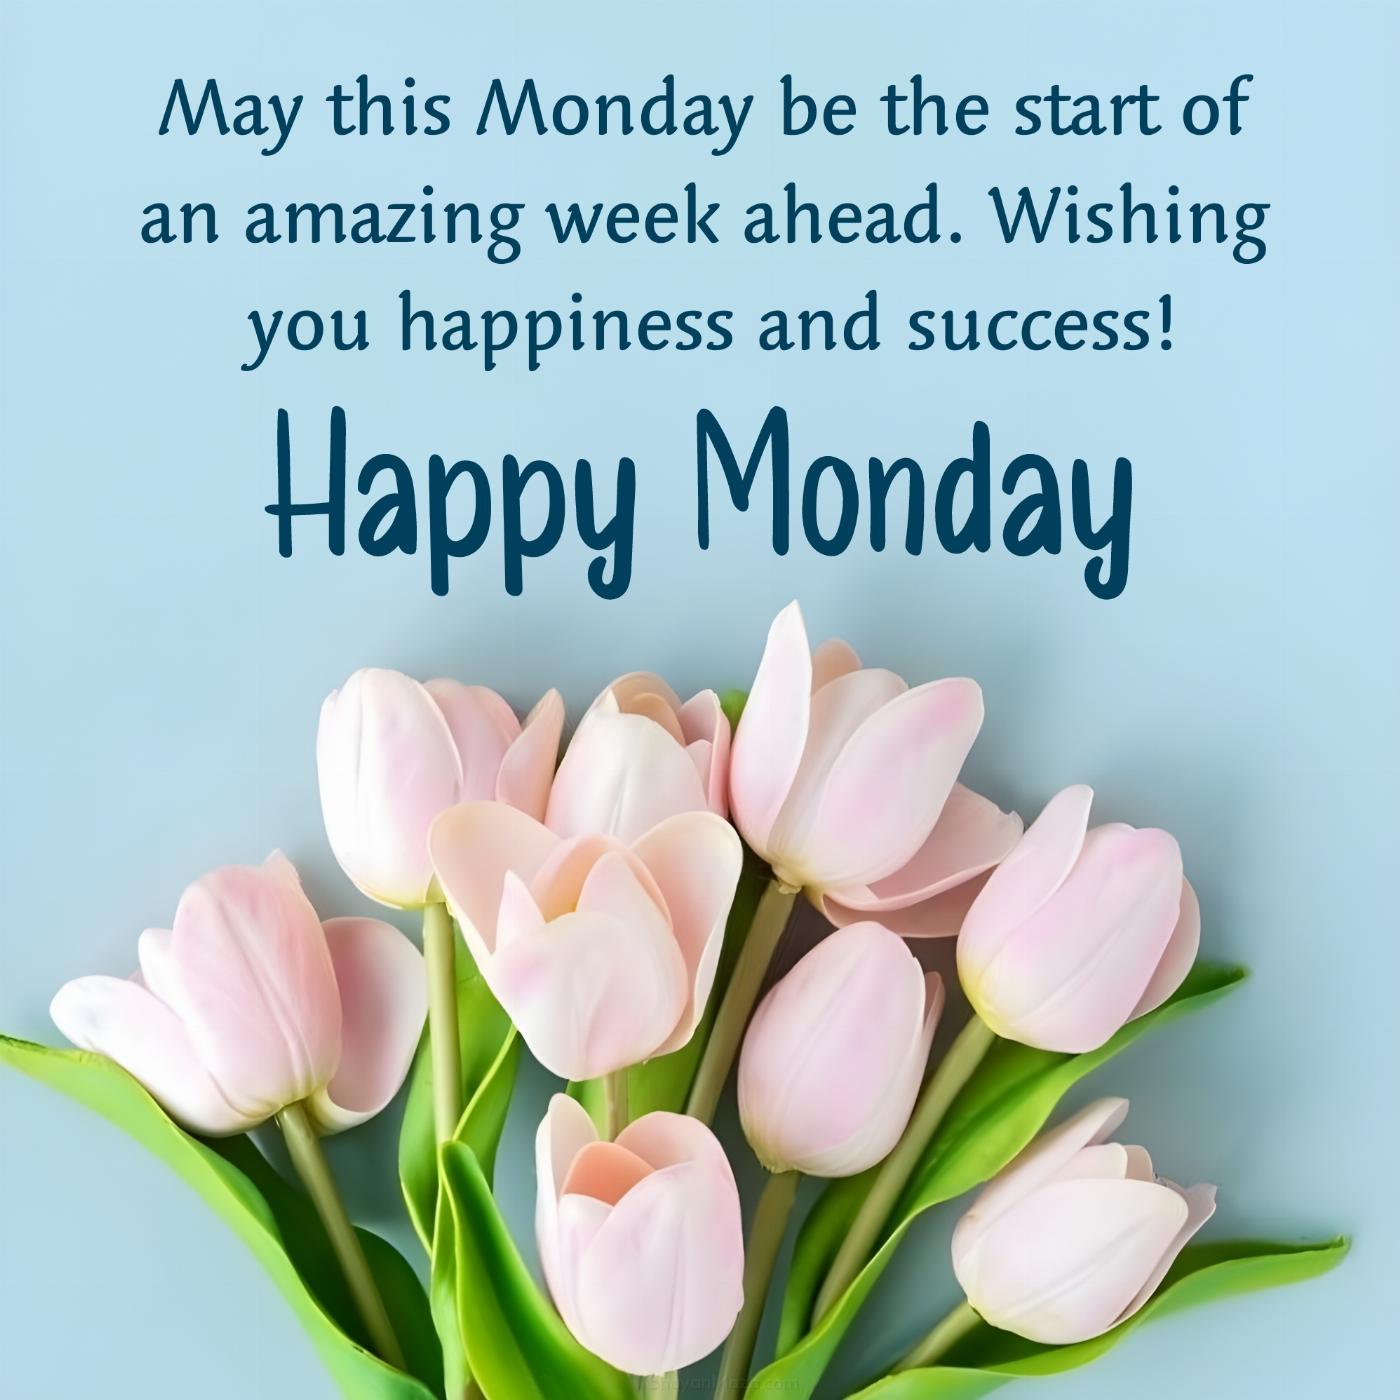 May this Monday be the start of an amazing week ahead